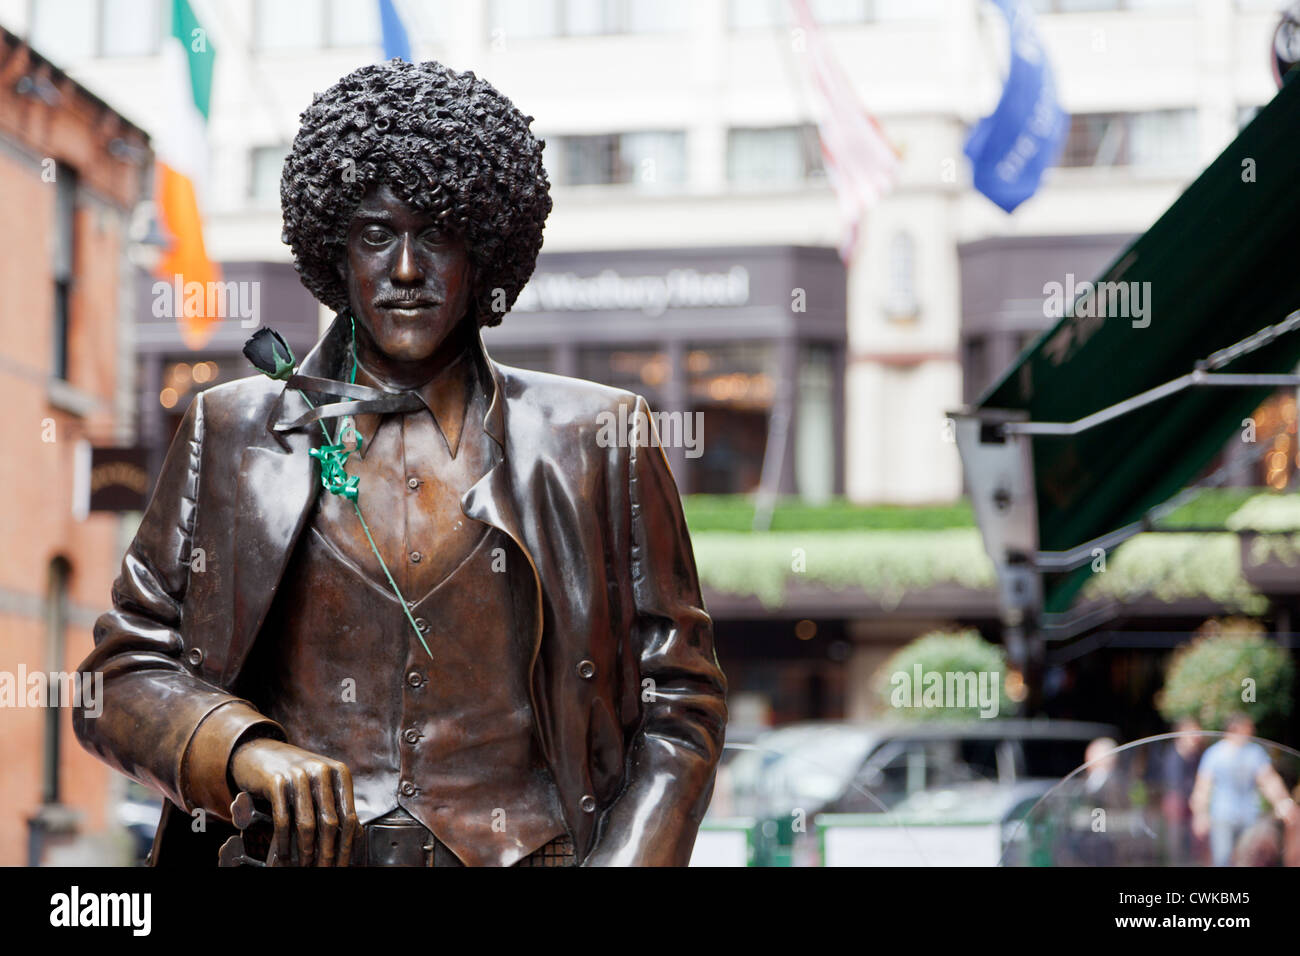 Philip P Lynott High Resolution Stock Photography and Images - Alamy